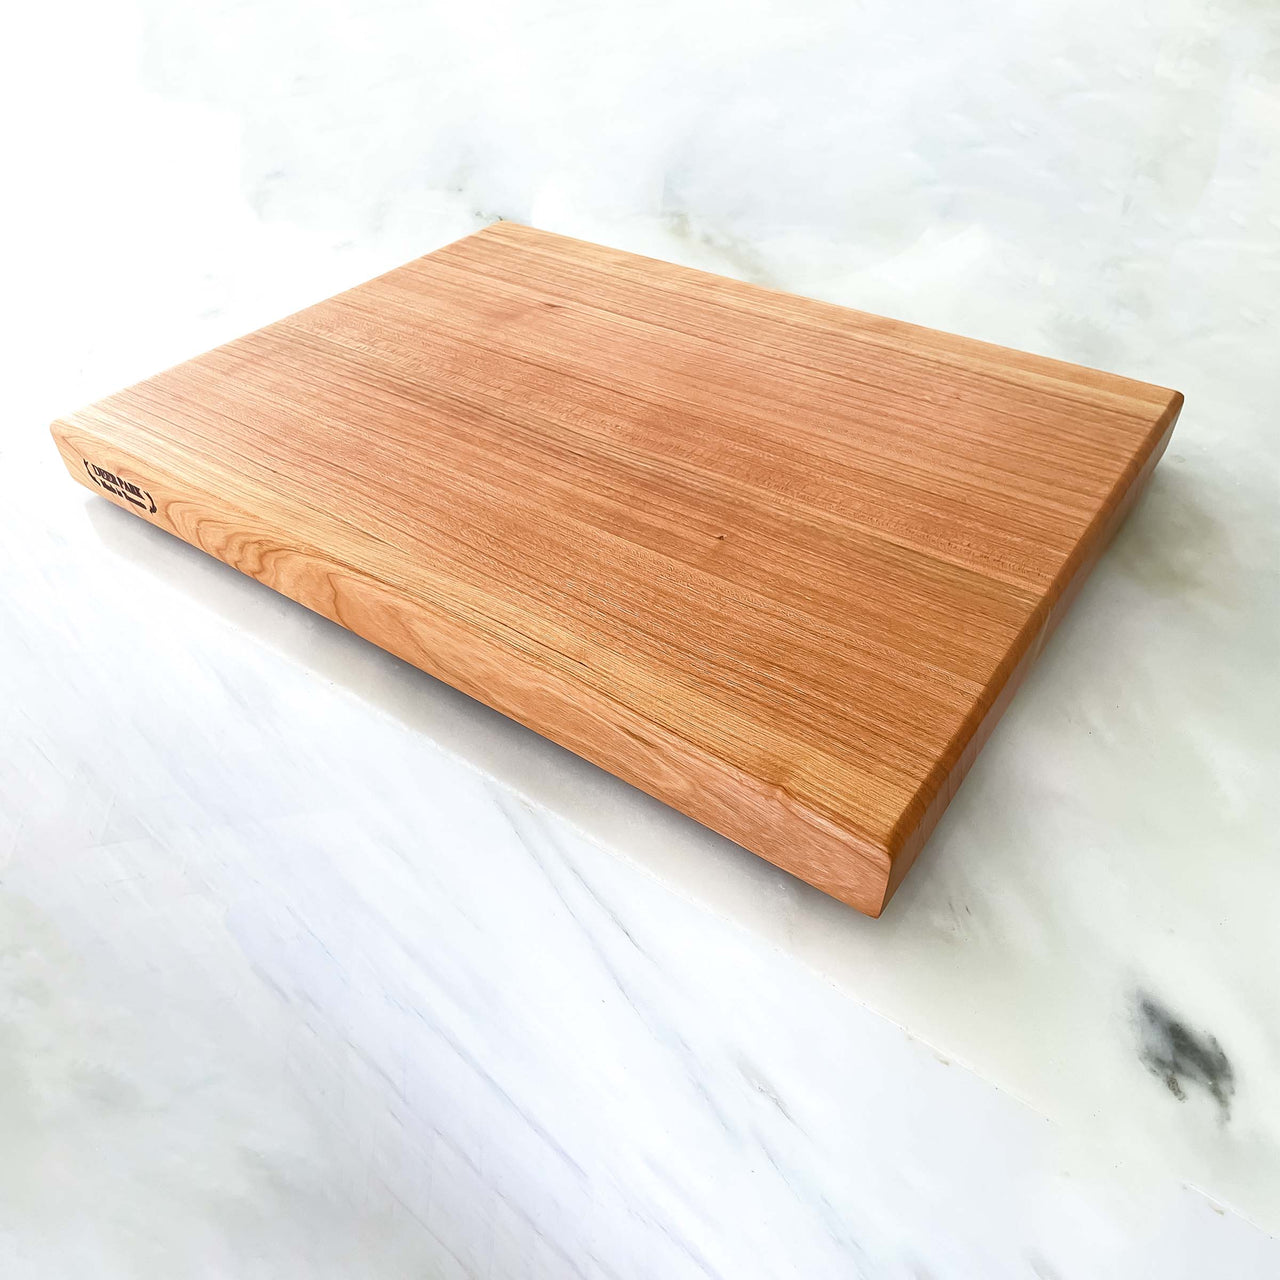 Set of Two Cherry Edge Grain Cutting Boards "The Danforth"